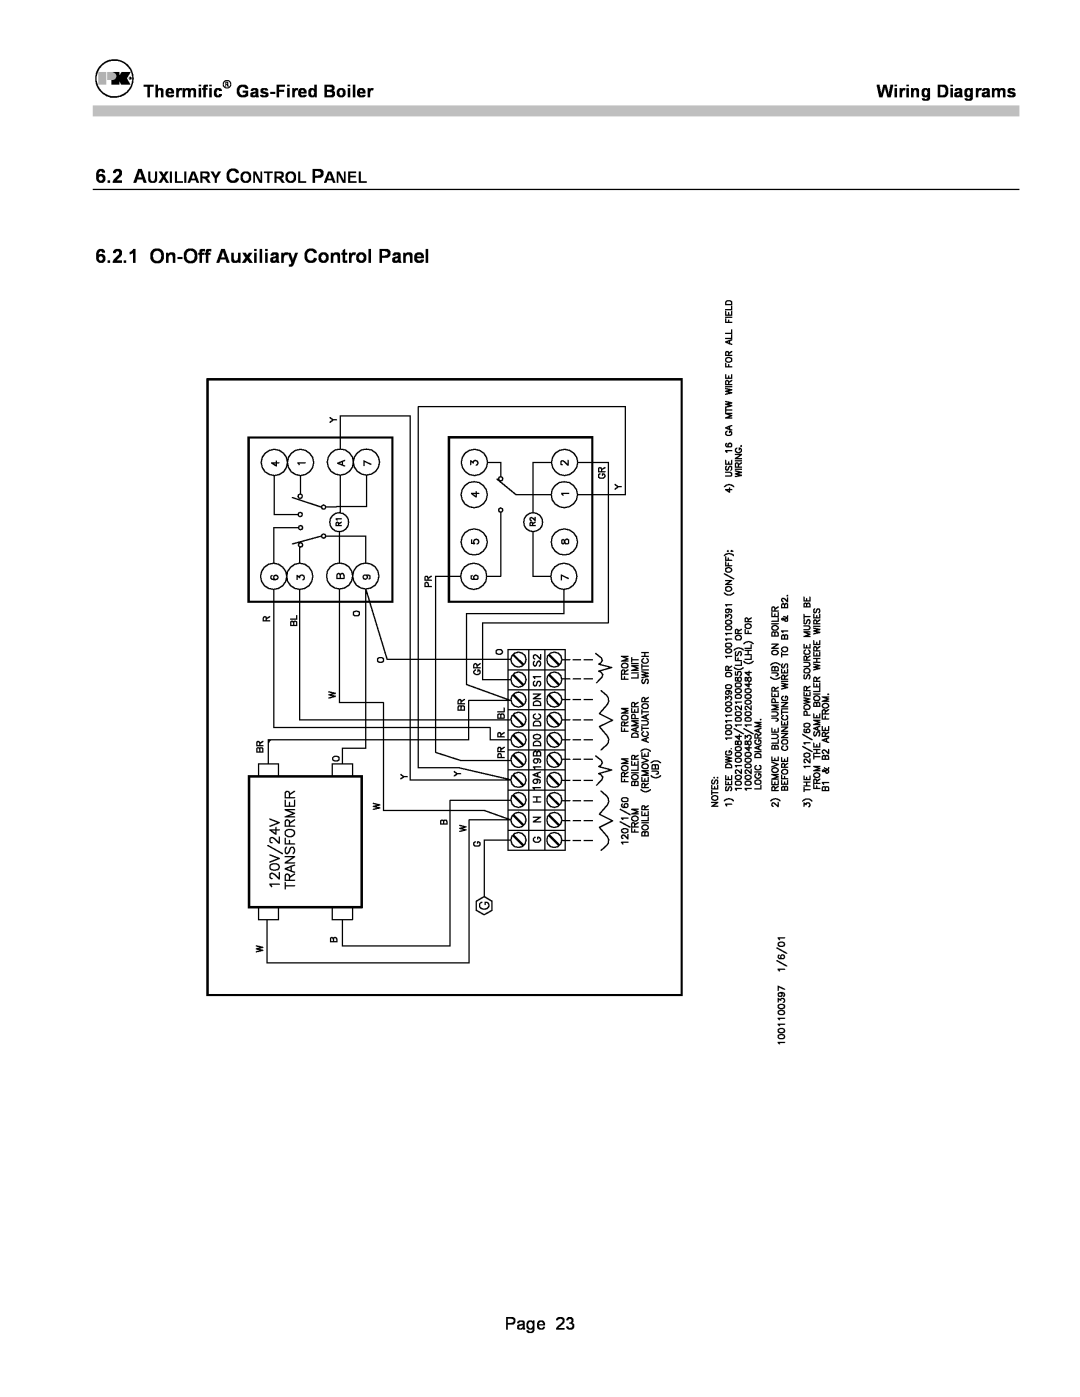 Patterson-Kelley DVSCM-02 owner manual On-OffAuxiliary Control Panel, Thermific Gas-FiredBoiler, Wiring Diagrams 